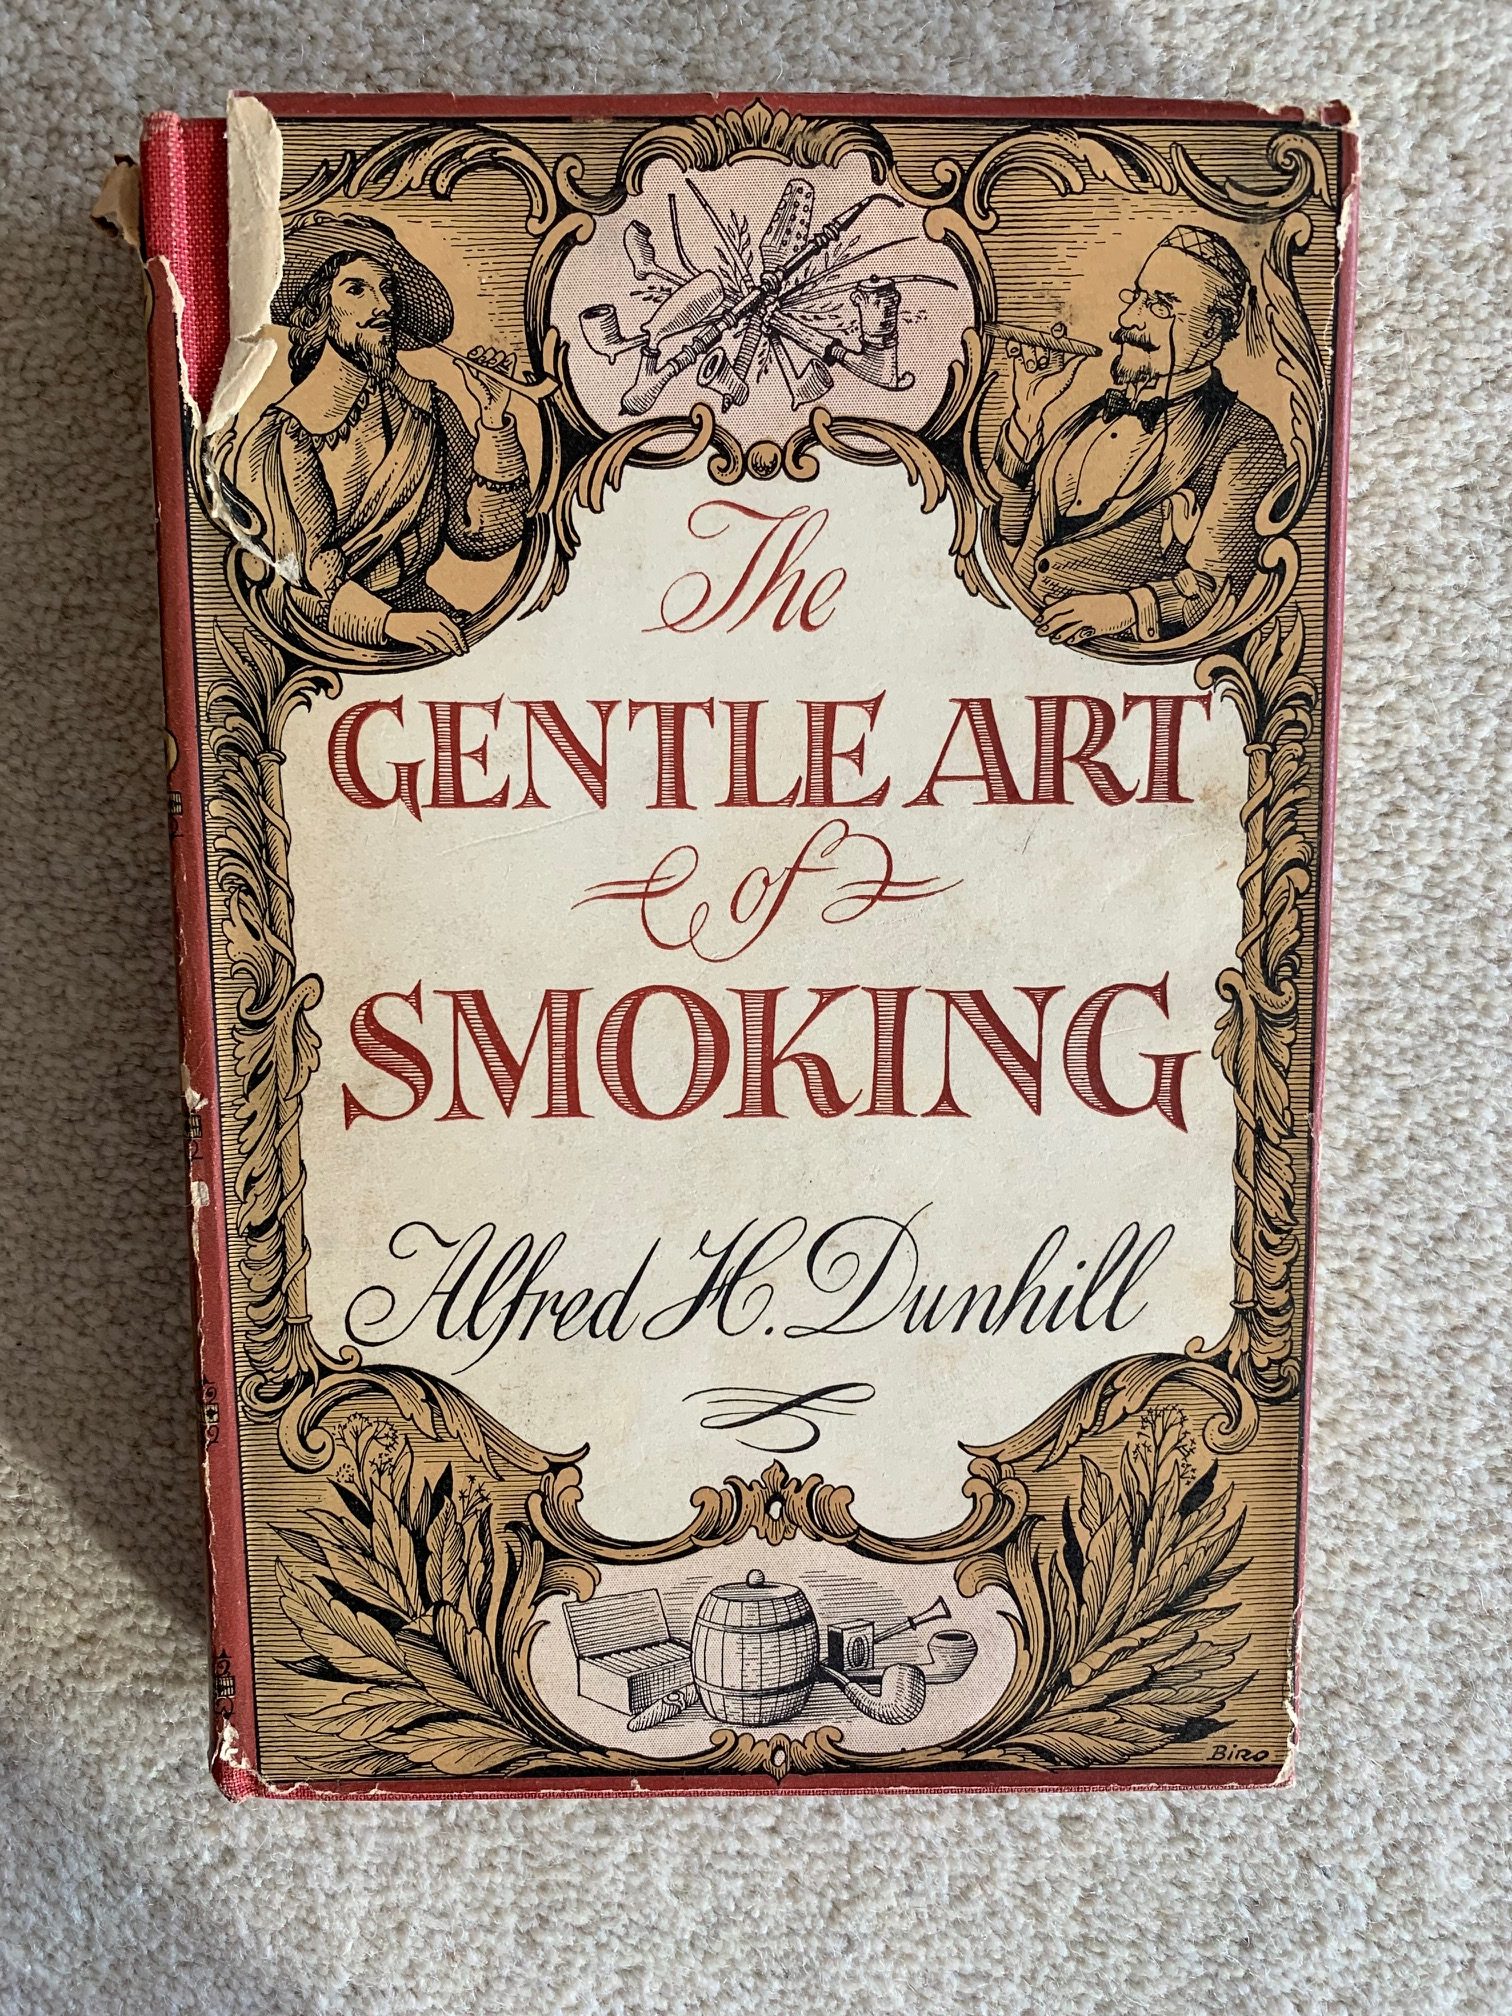 The Gentle Art of Smoking - Alfred Dunhill Image